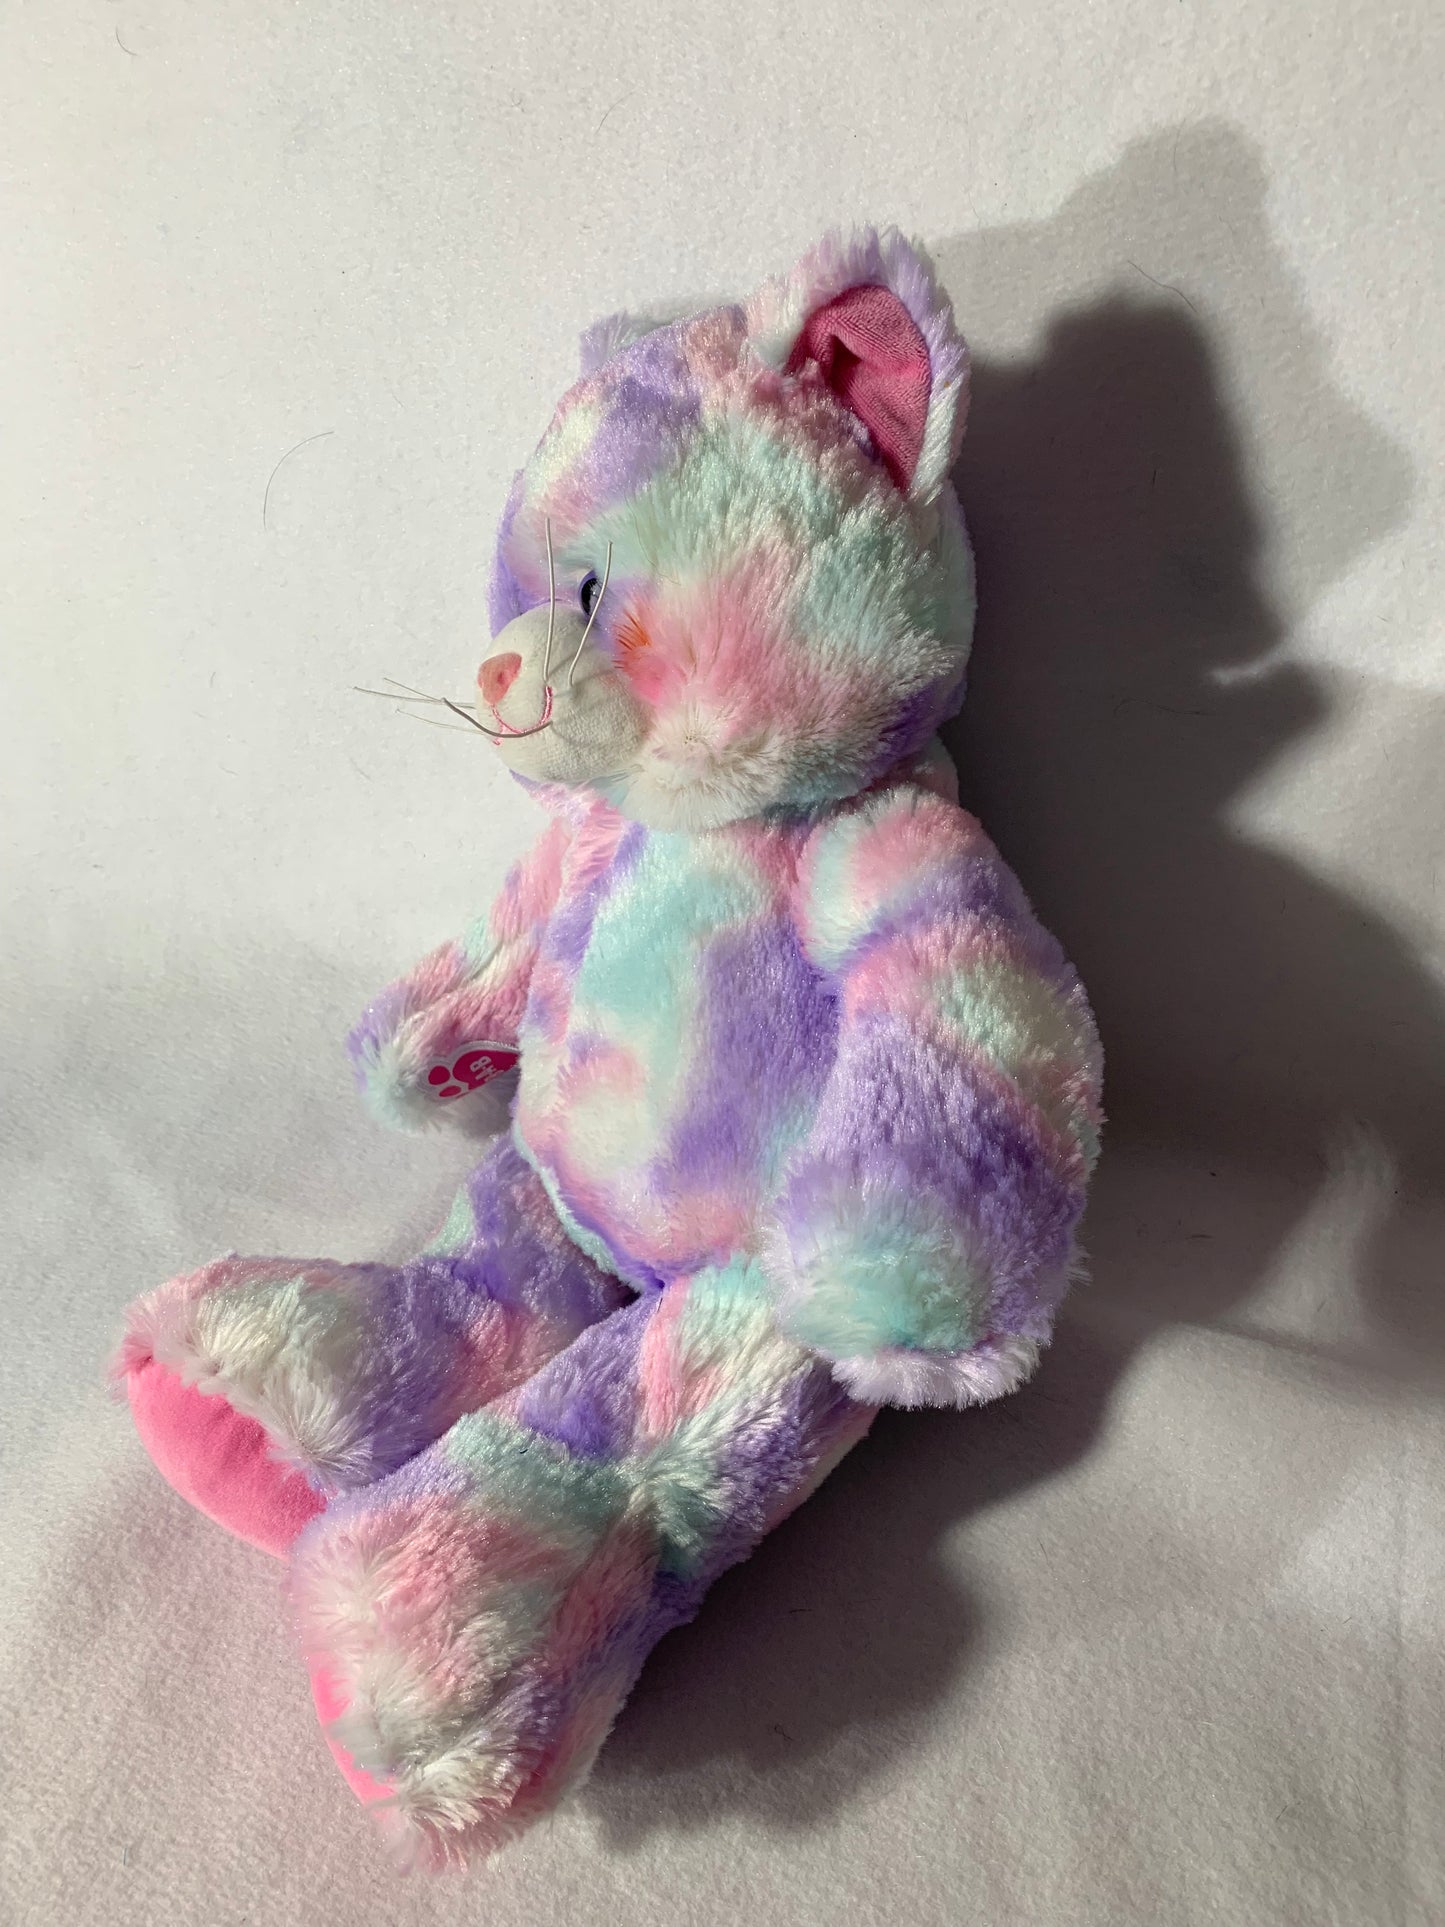 Weighted stuffed animal, Large plush cat with 4 lbs, rainbow, grey, beige kitten, washable buddy, orange stripe, Aunt Sandy's Sewing, autism sensory toy